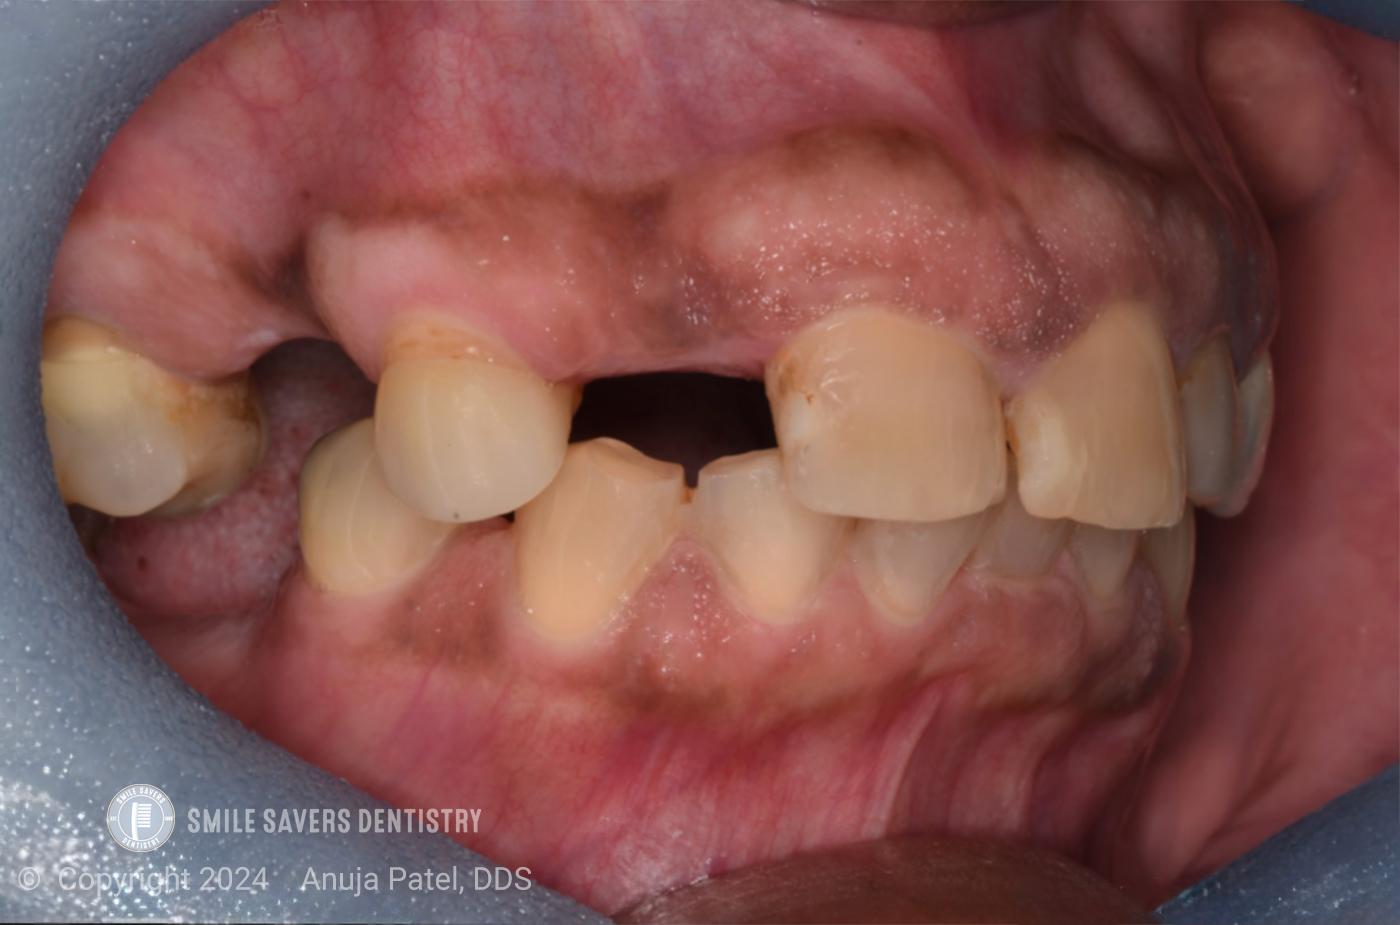 Zirconia Restorations in Dentistry - Case Study - Dr. Anuja Patel, DDS - Smile Savers Dentistry